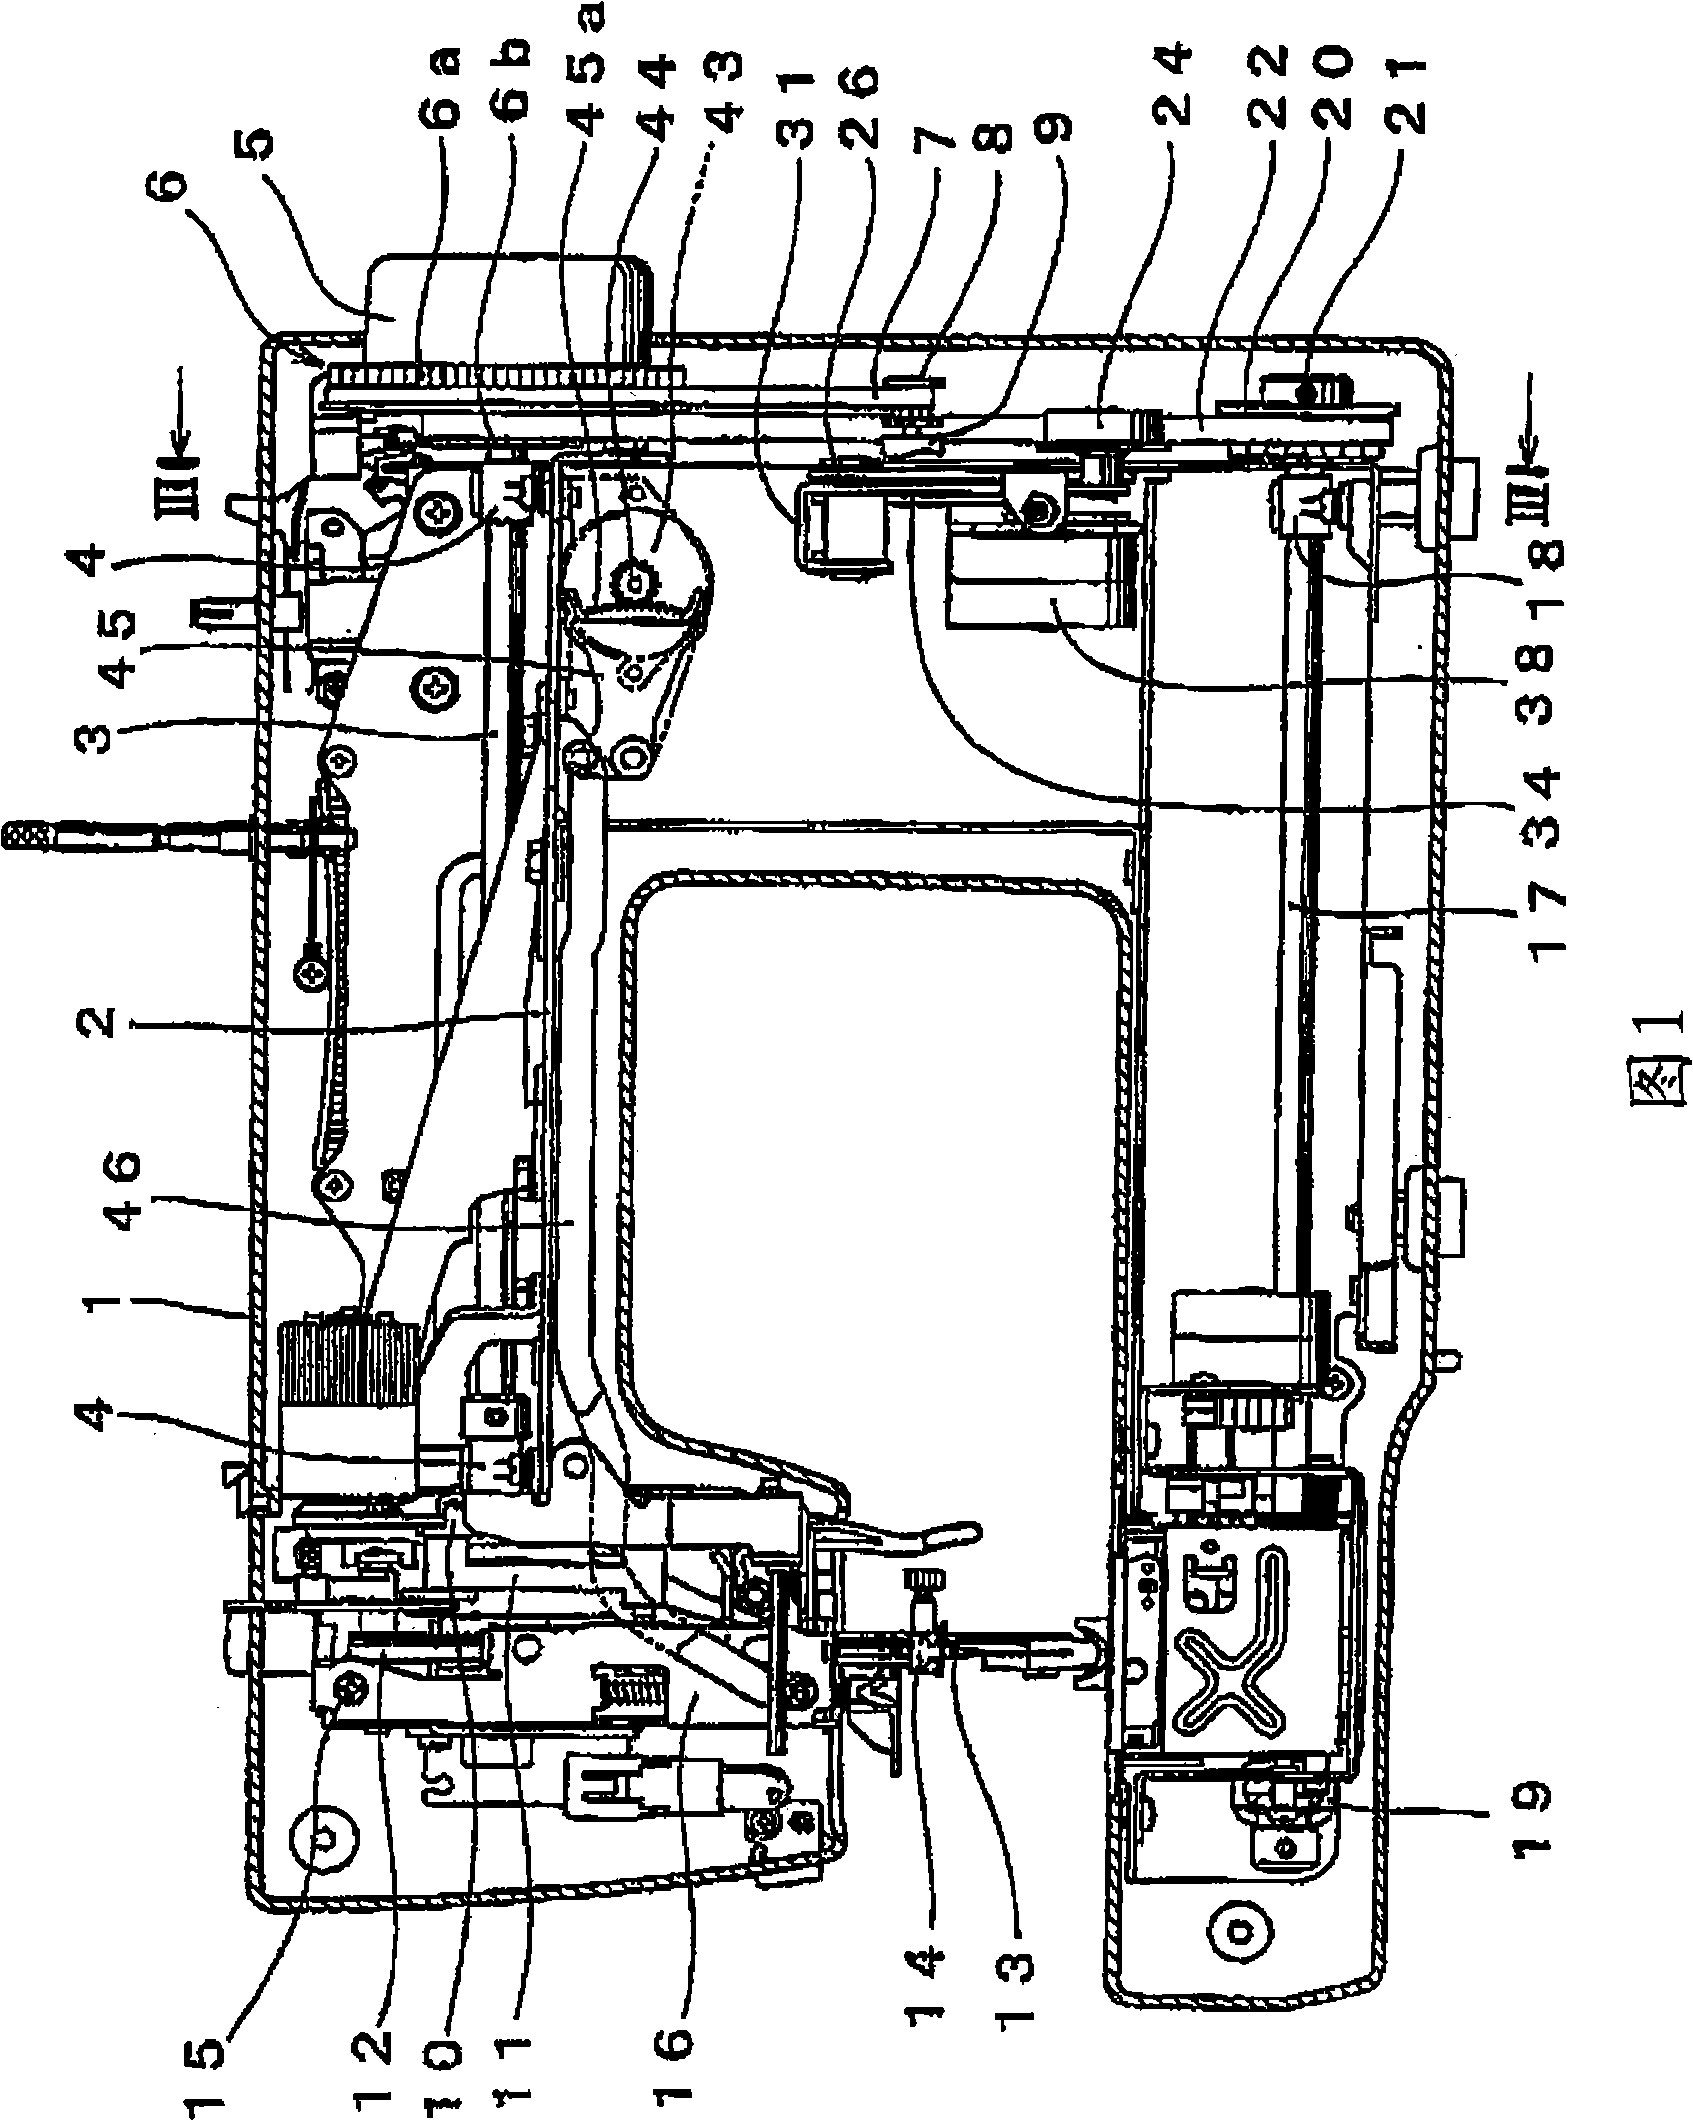 Apparatus for adjusting timing of needle and looptaker of sewing machine